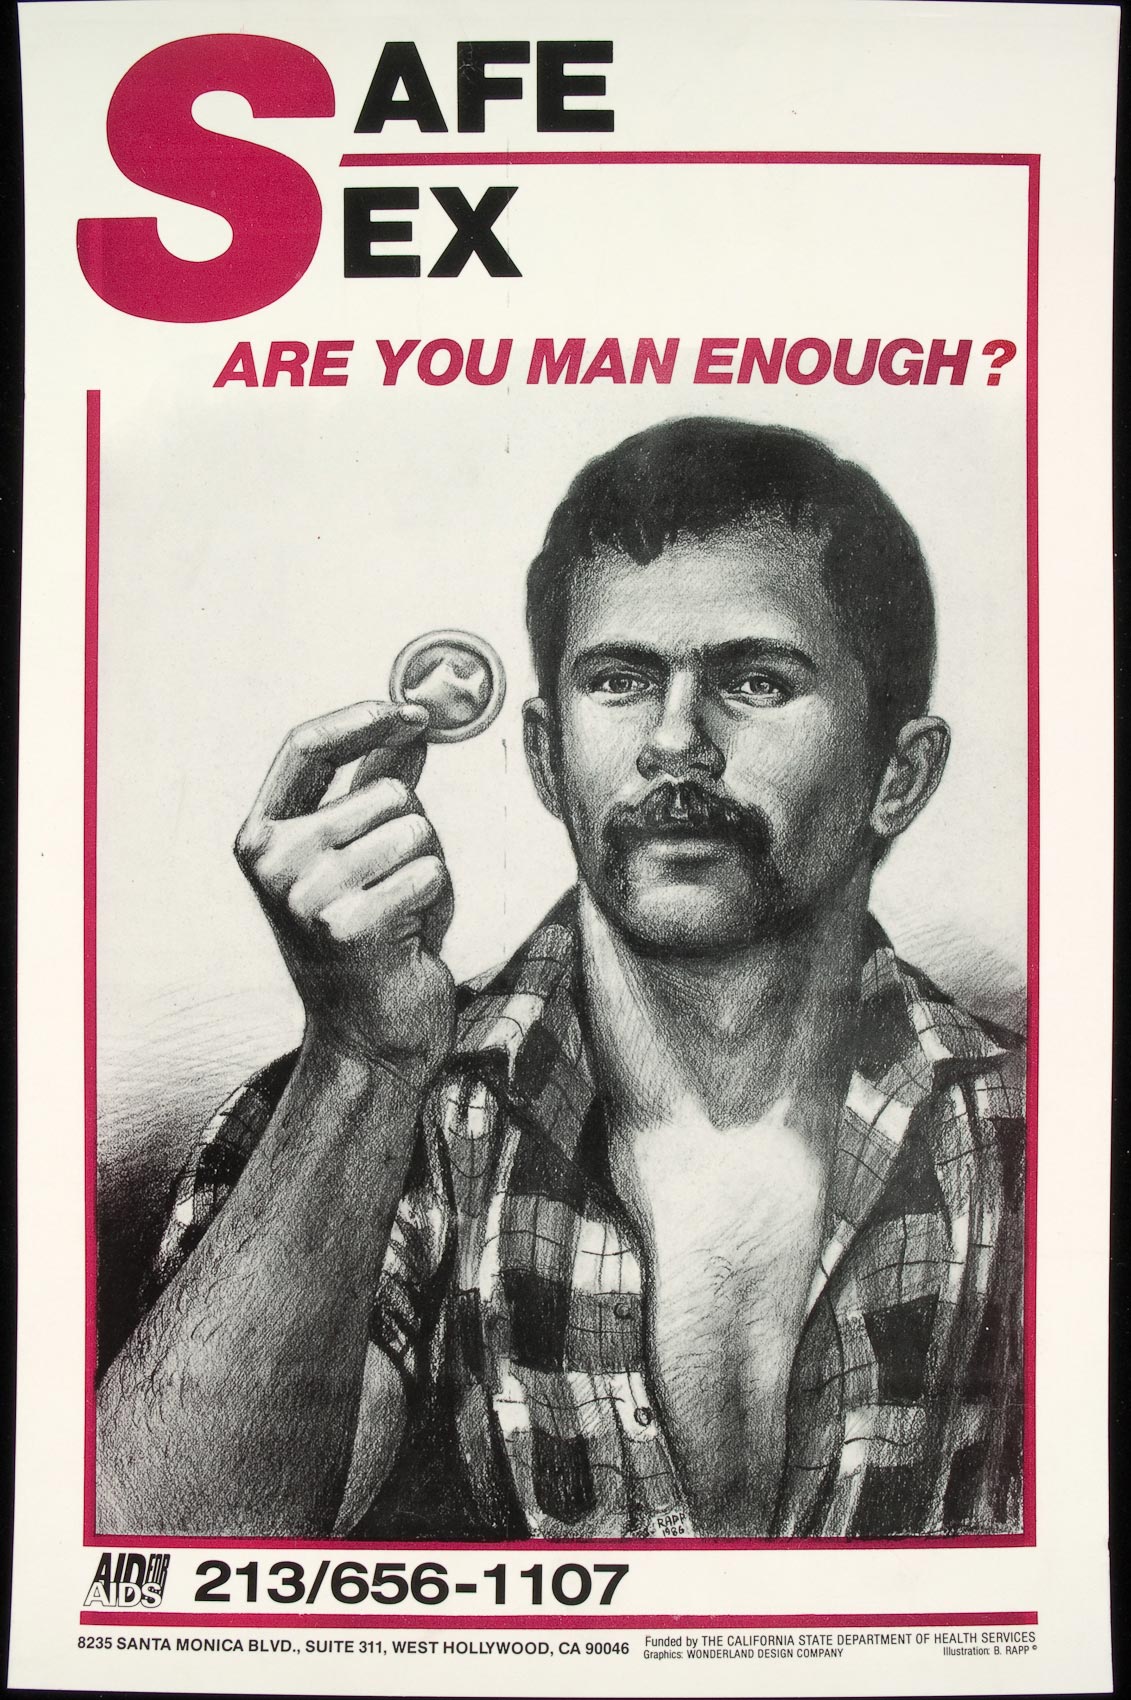 Safe Sex: Are You Man Enough? 1985, Aid for AIDS, West Hollywood, California.